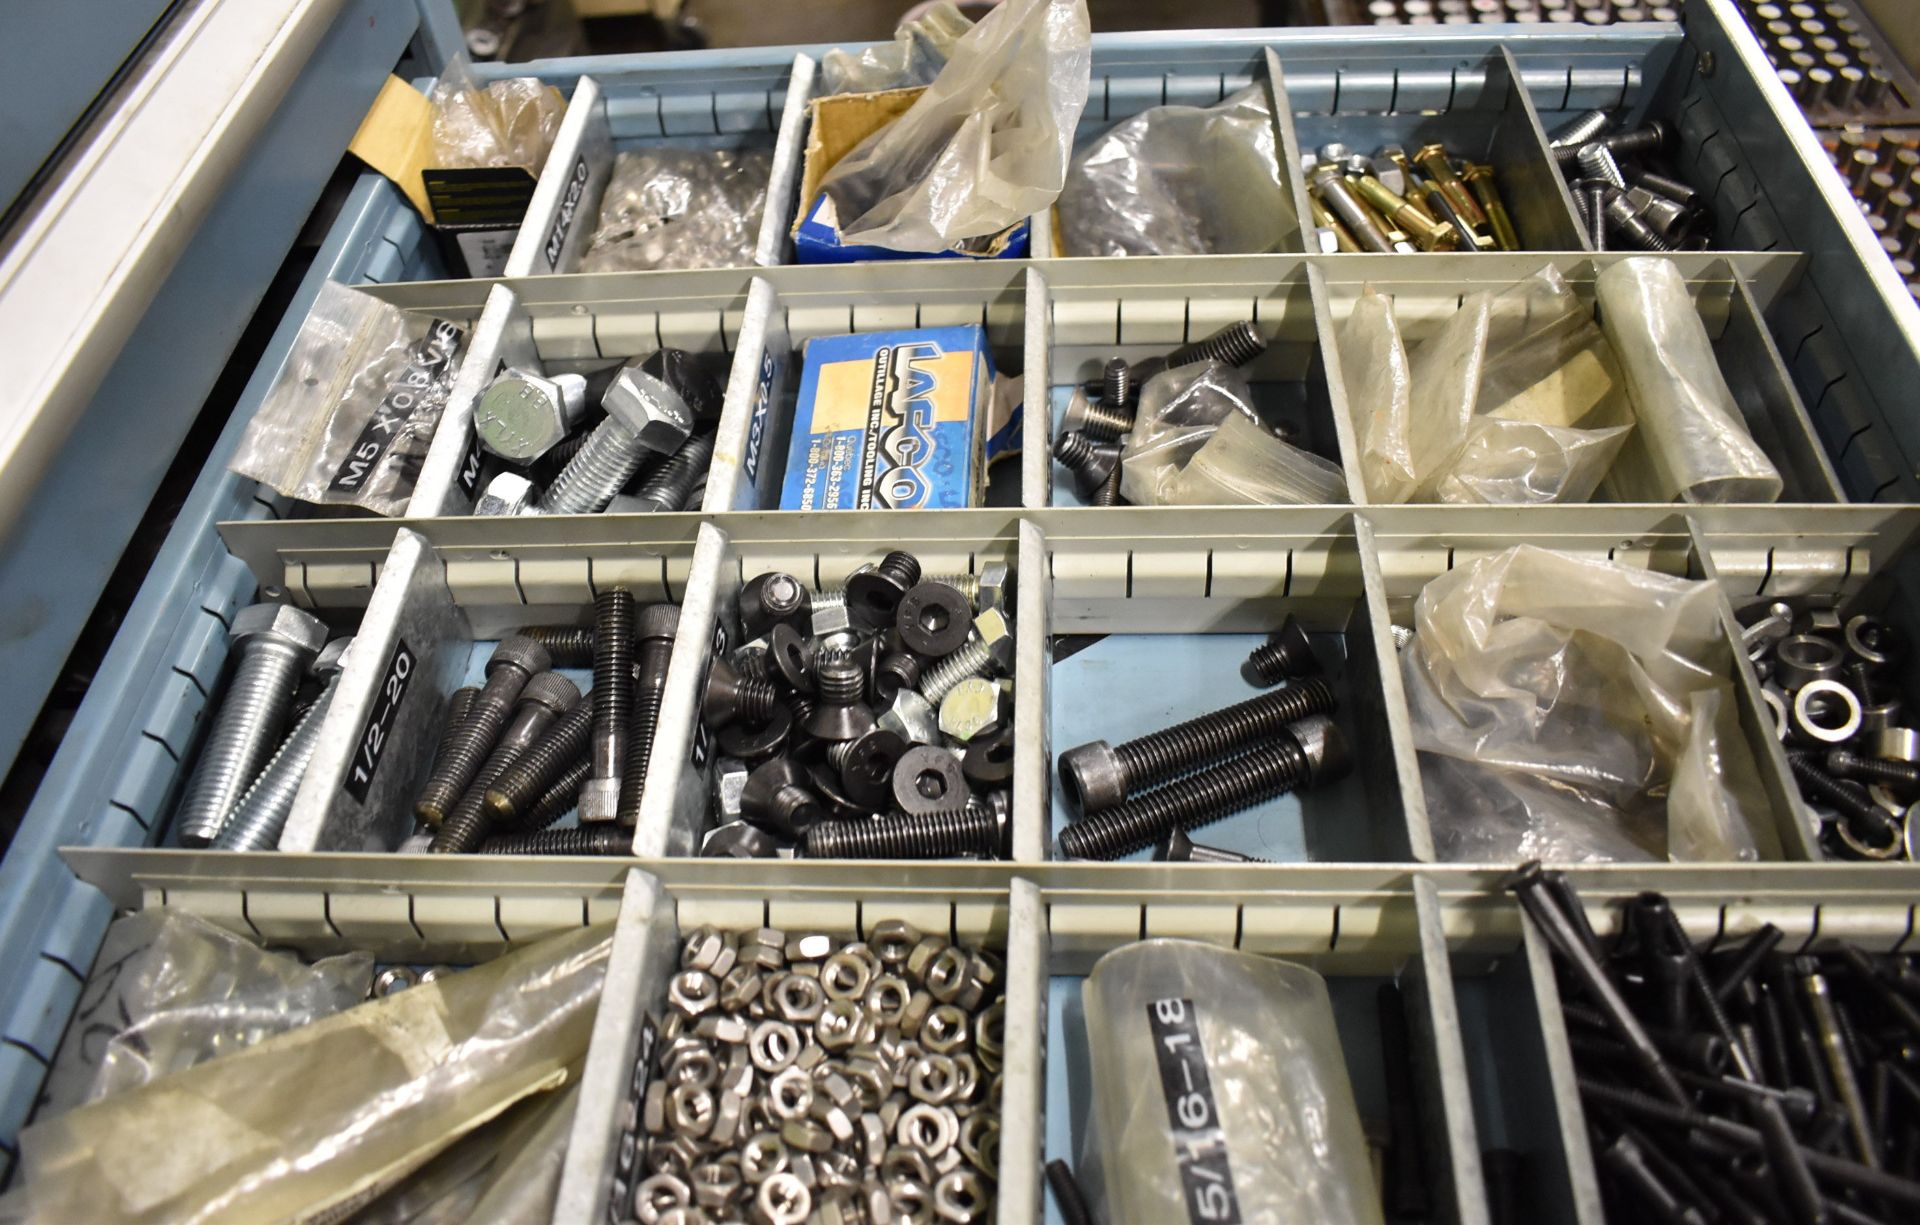 LOT/ CONTENTS OF CABINET CONSISTING OF HARDWARE, END MILLS AND SUPPLIES - Image 3 of 7